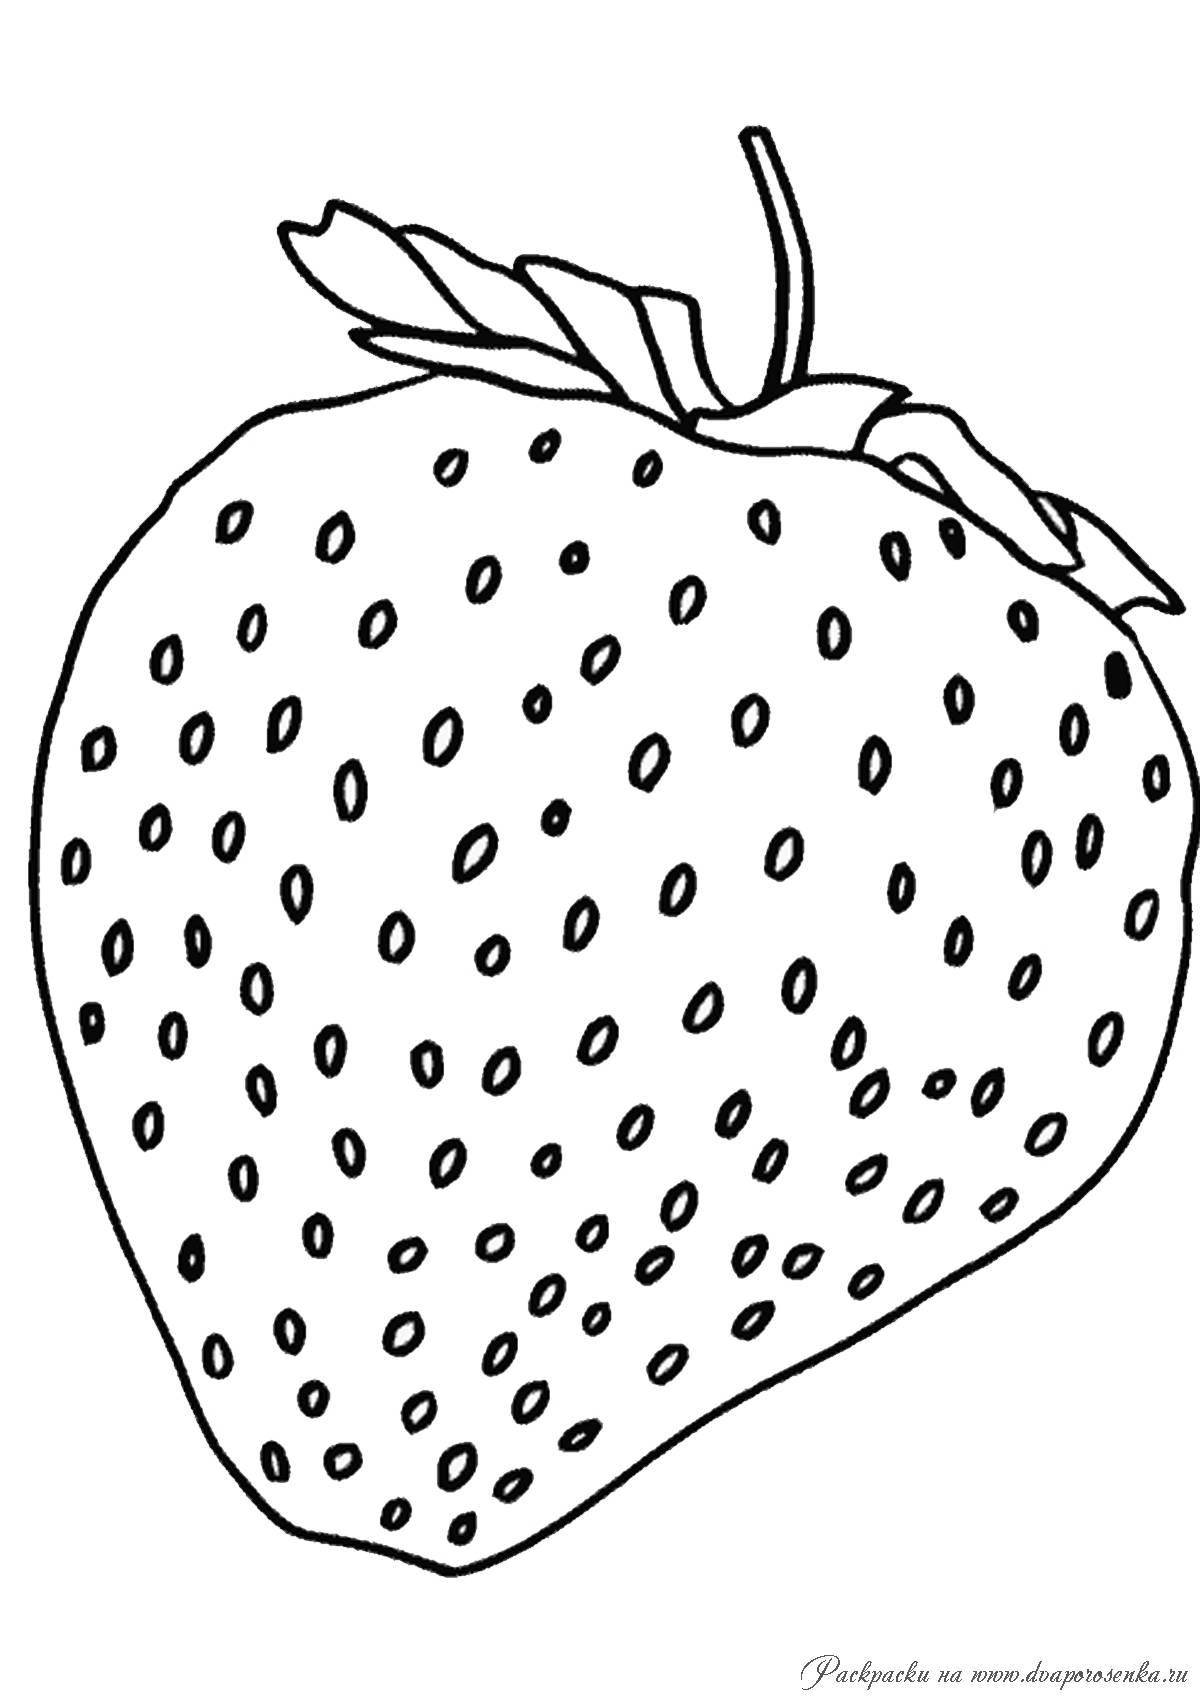 Live fruit and vegetable coloring page